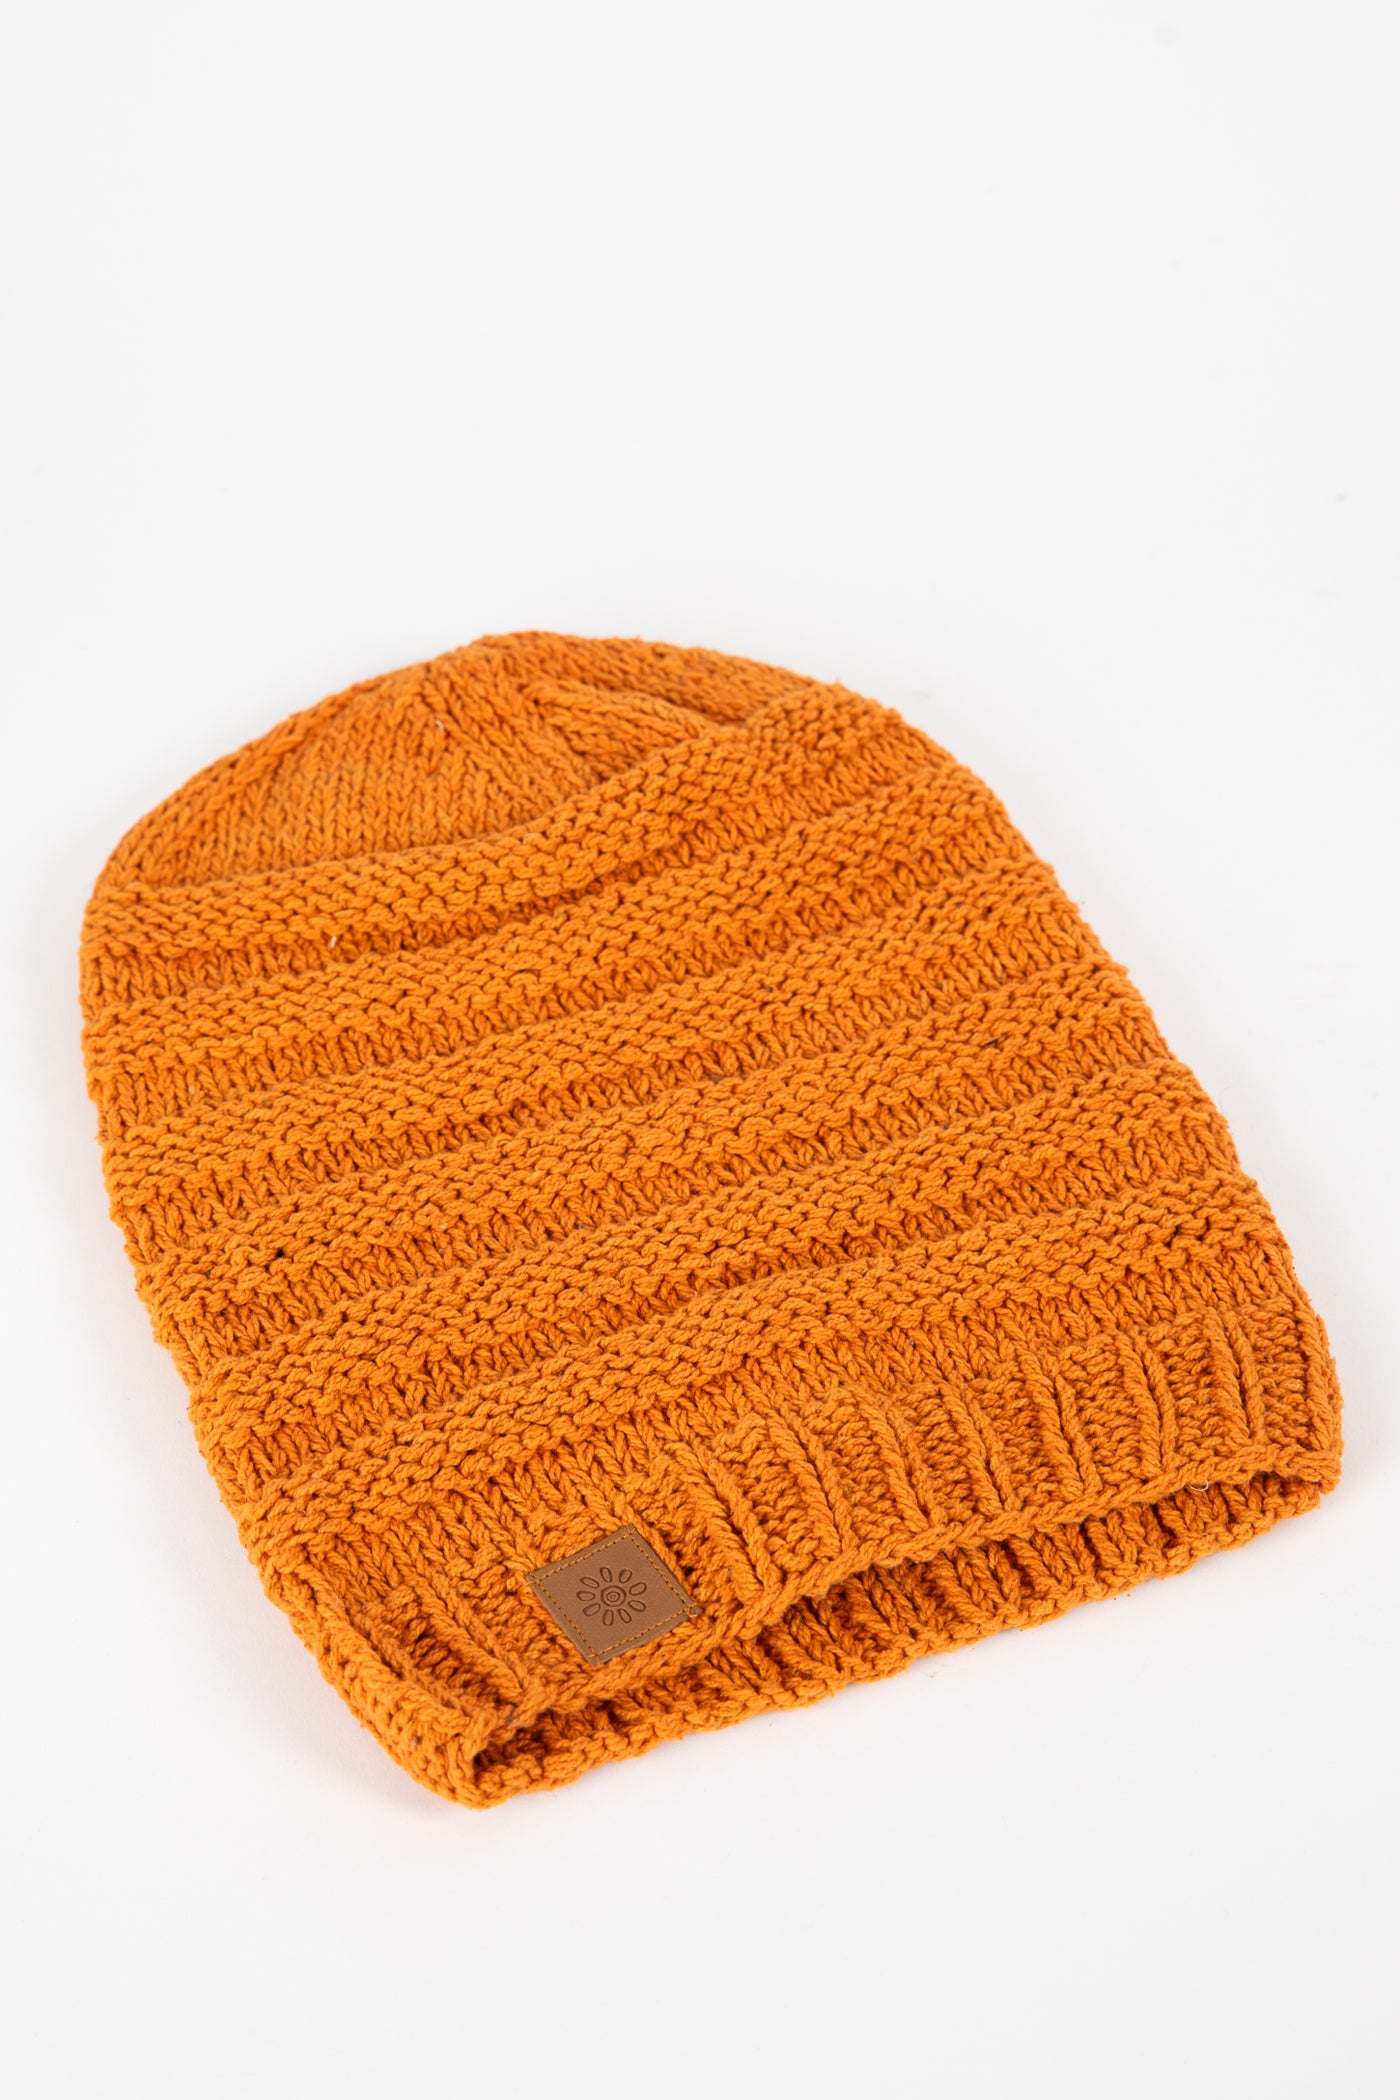 Cotton Ribbed Slouch Beanie